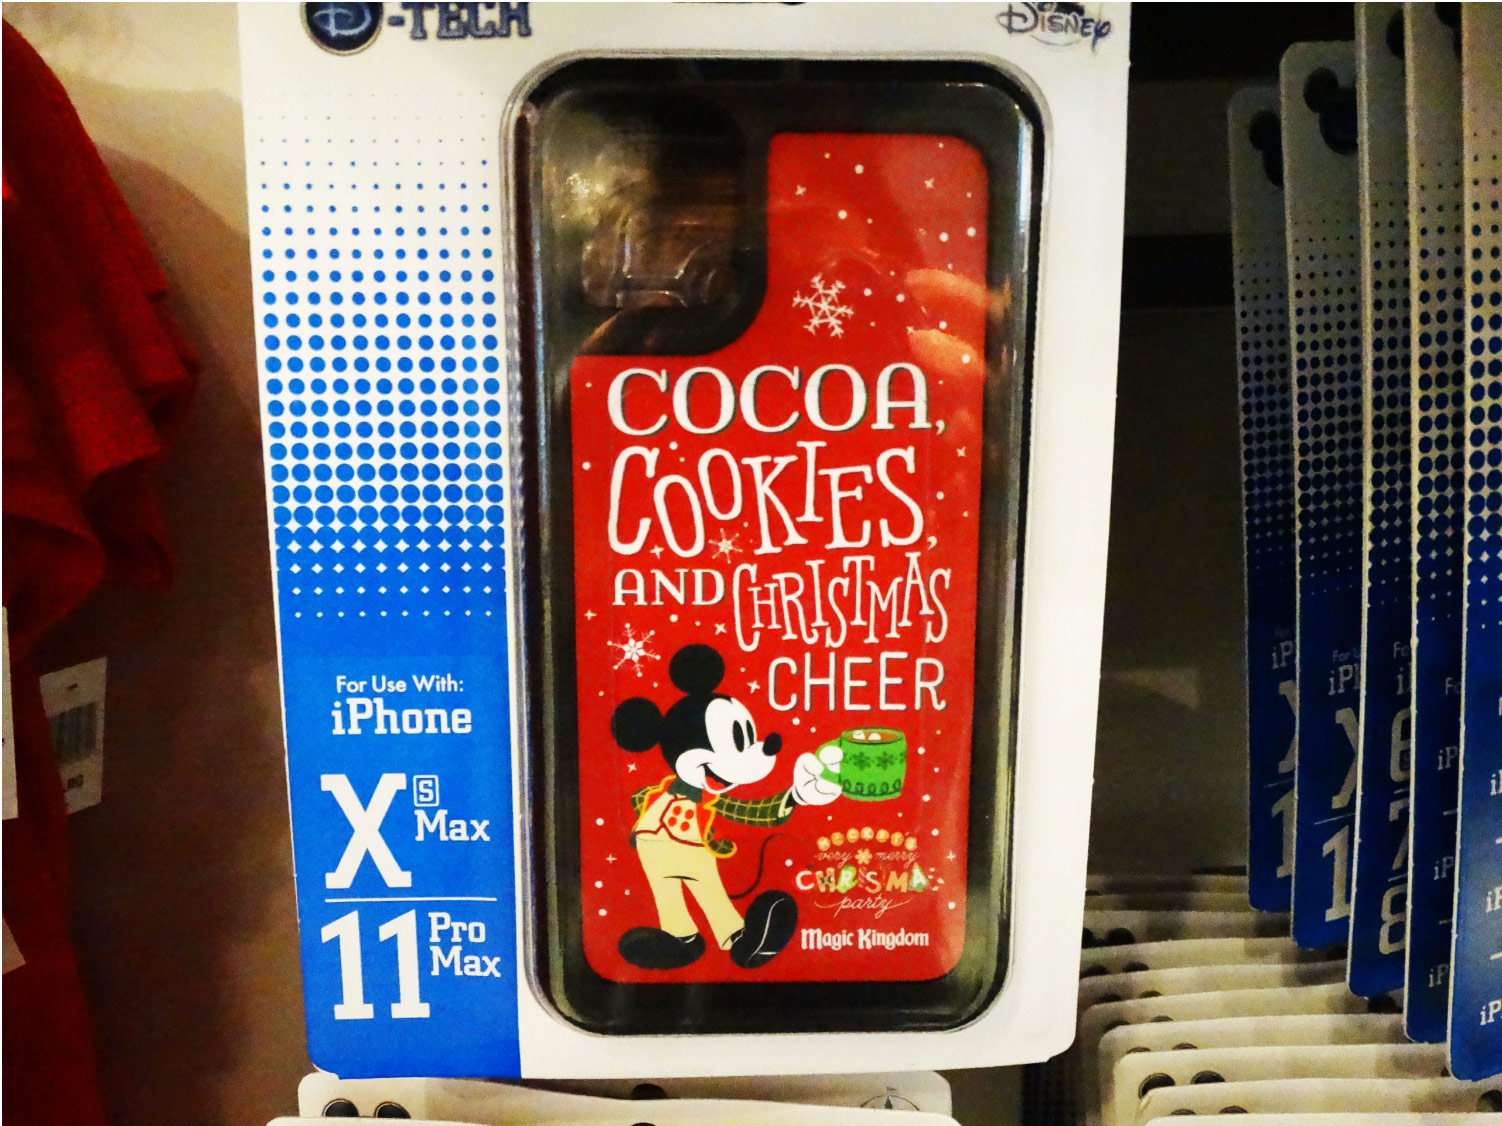 Limited release iPhone case that reads "Cocoa, Cookies, and Christmas Cheer" on red background with snowflakes and Mickey Mouse holding a cup off cocoa on the bottom left corner. Name of event, Mickey's Very Merry Christmas Party, Magic Kingdom®" printed on the bottom right. Lake Buena Vista, Florida, 2019.